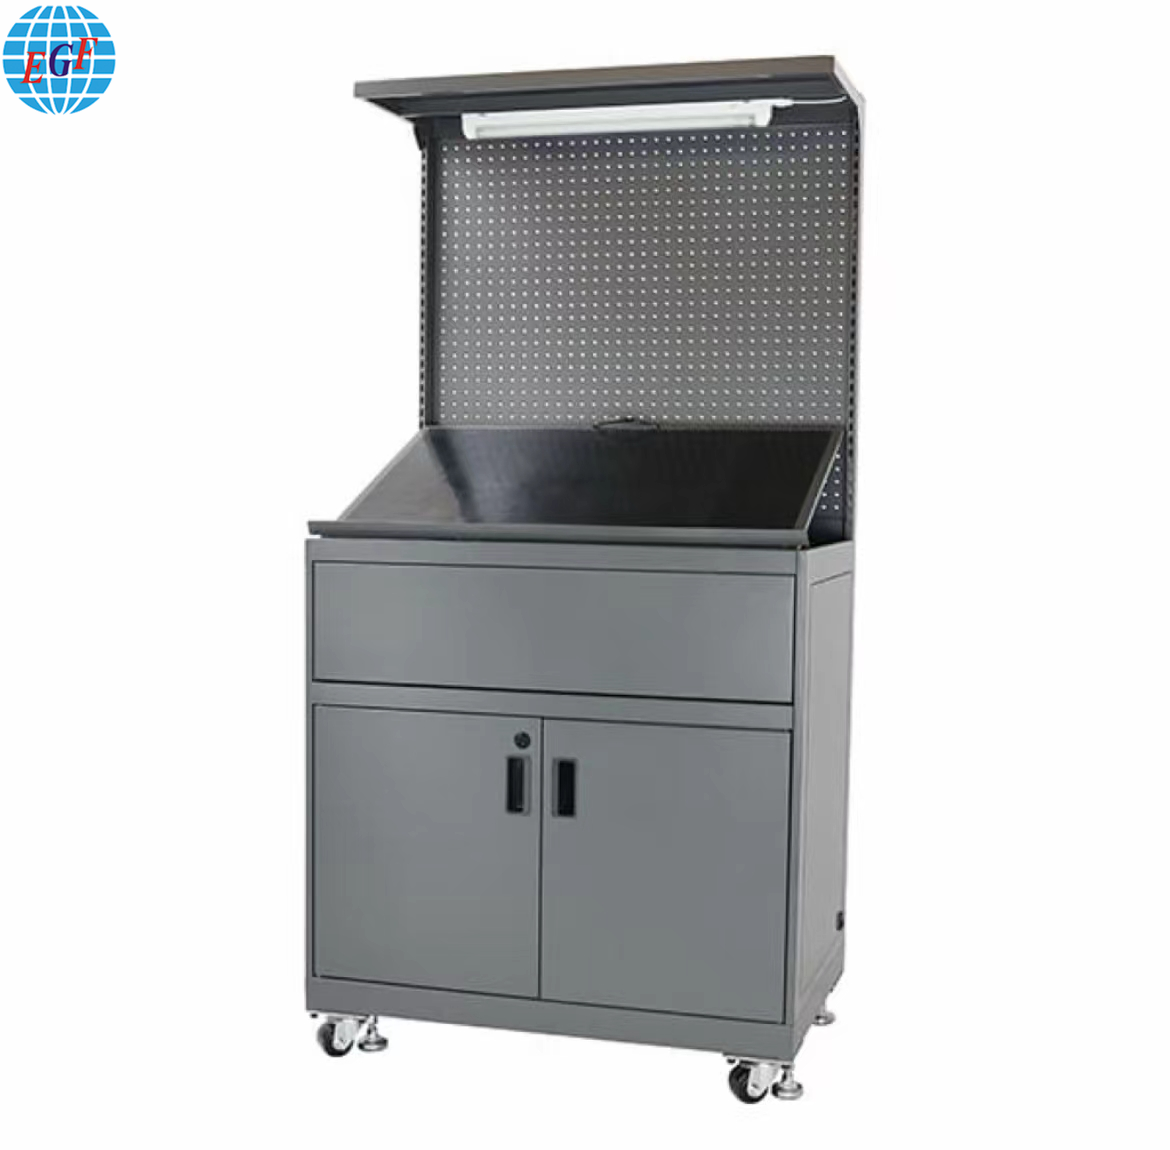 Adjustable Modular Steel Workstation with Pegboard, Drawer & Cabinet Storage - Grey Matte Finish with LED Mount & Lockable Casters